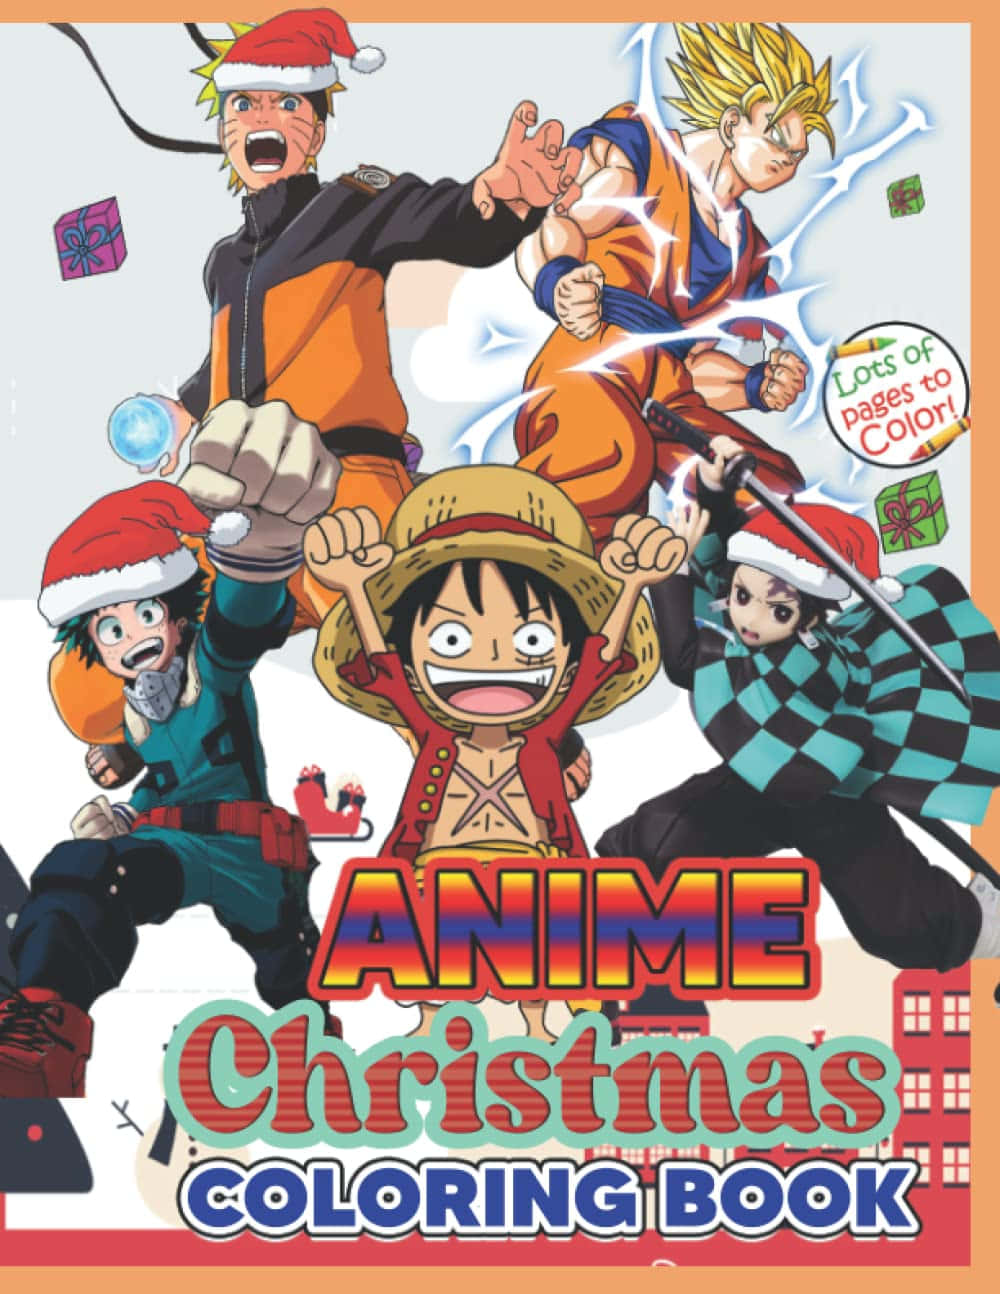 Get in the holiday spirit with this festive Anime Christmas Scene!